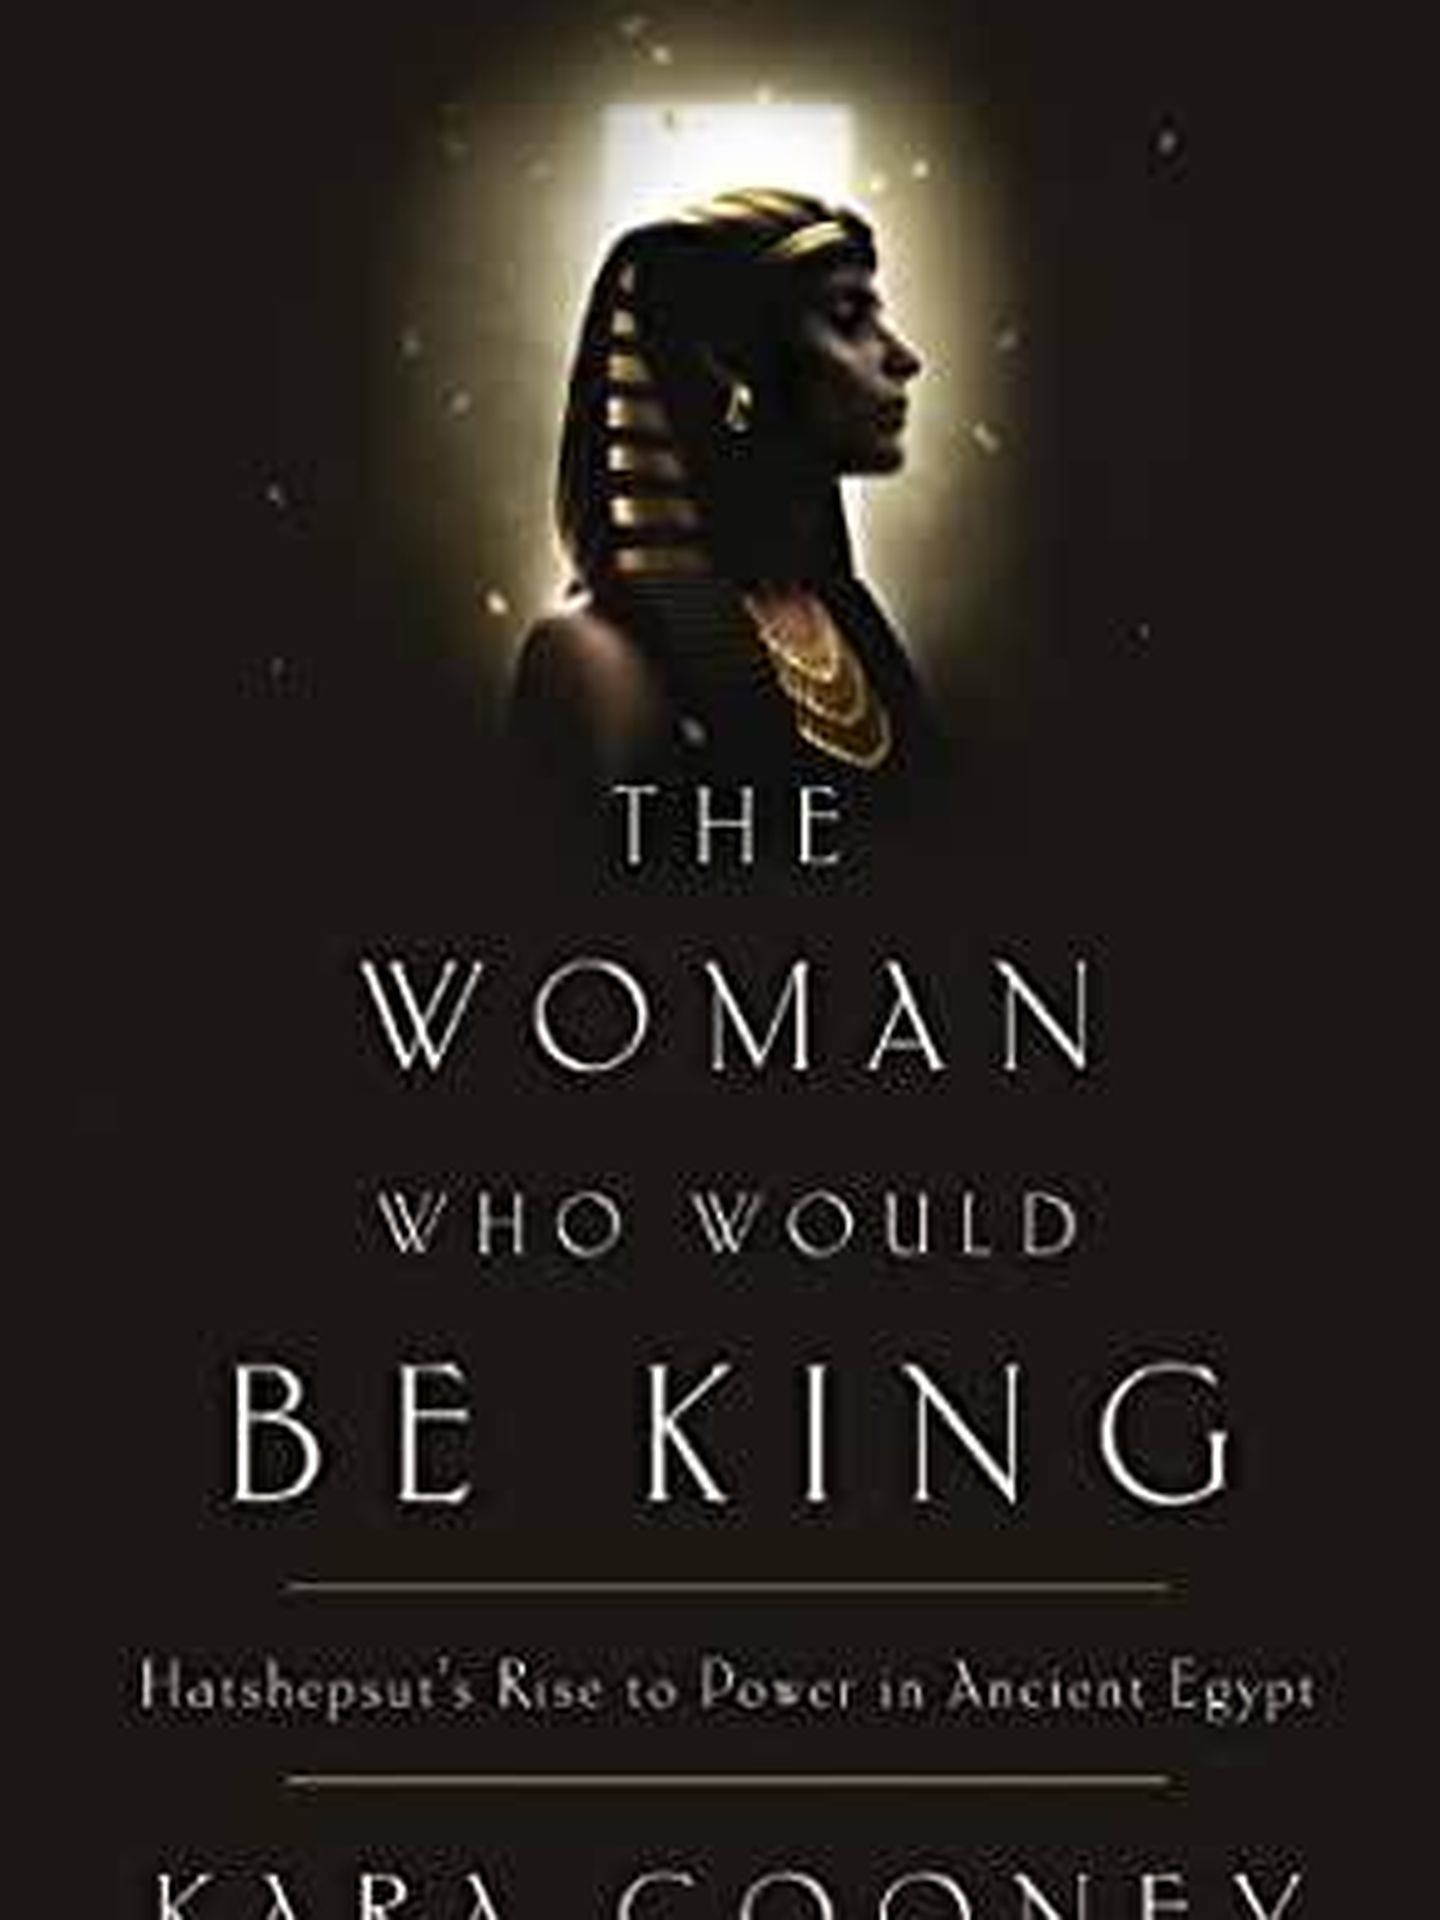  'The Woman Who Would Be King'. (Amazon)